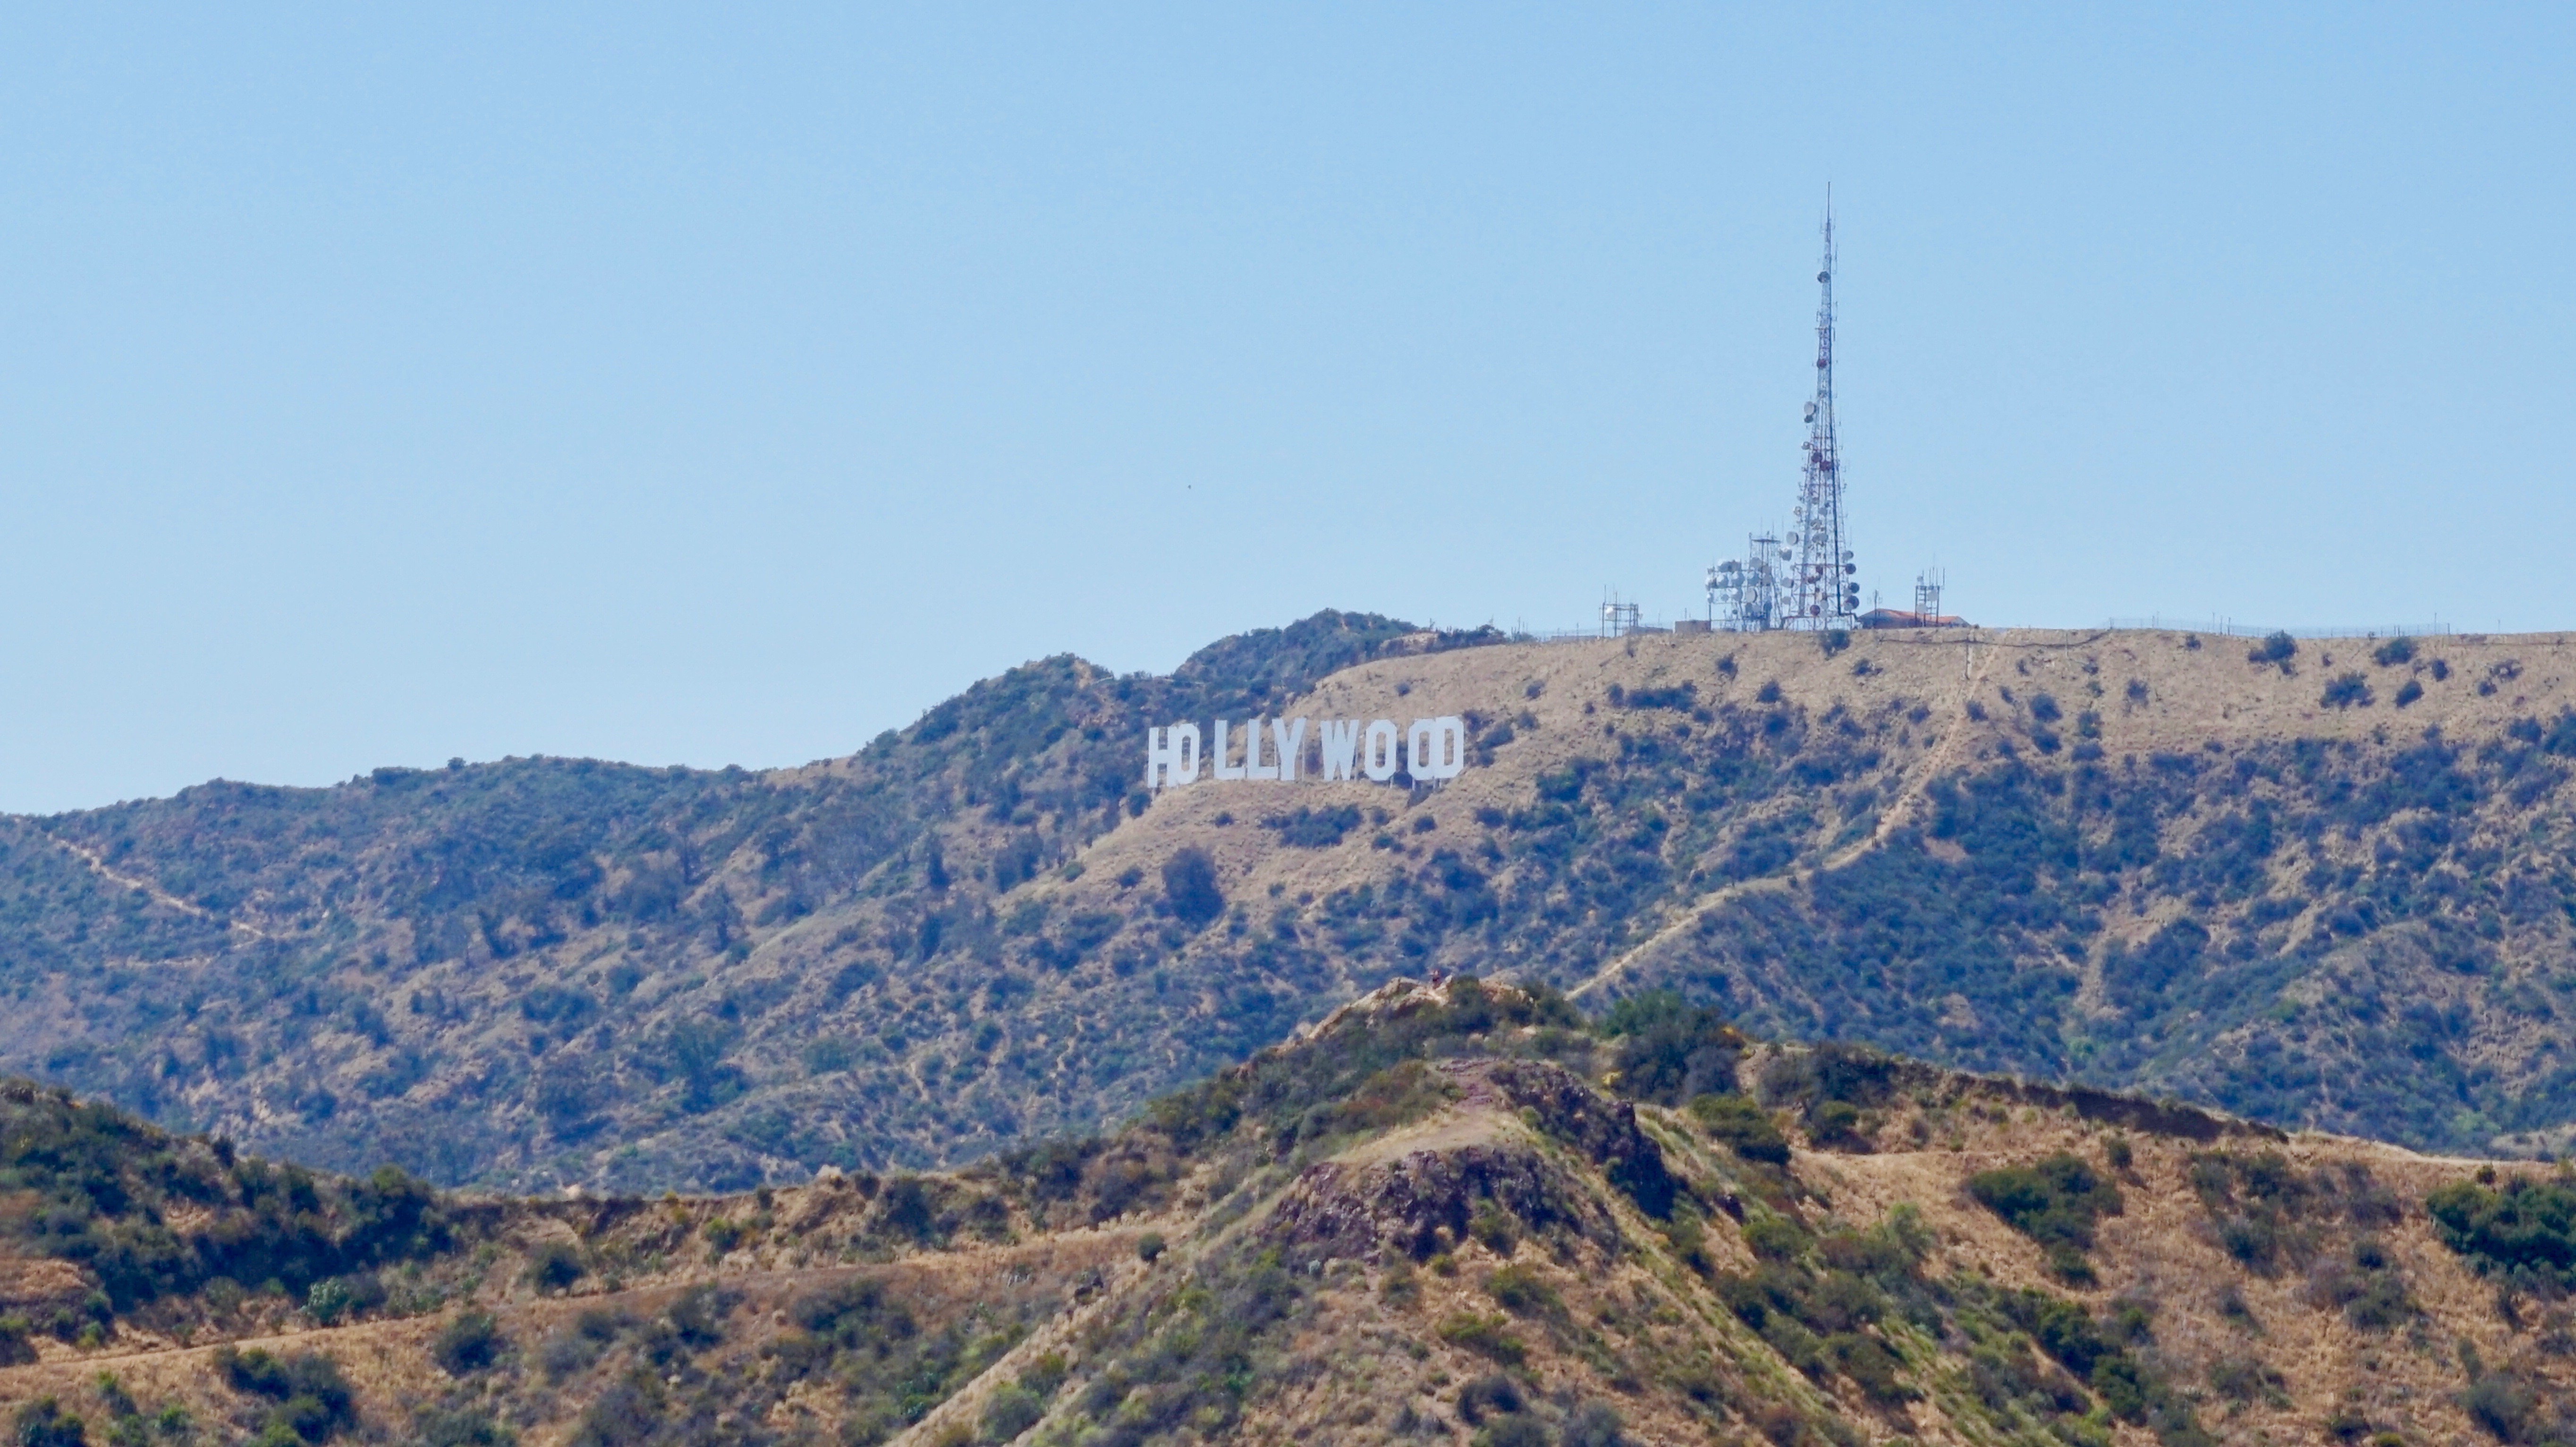 griffith observatory hollywood sign